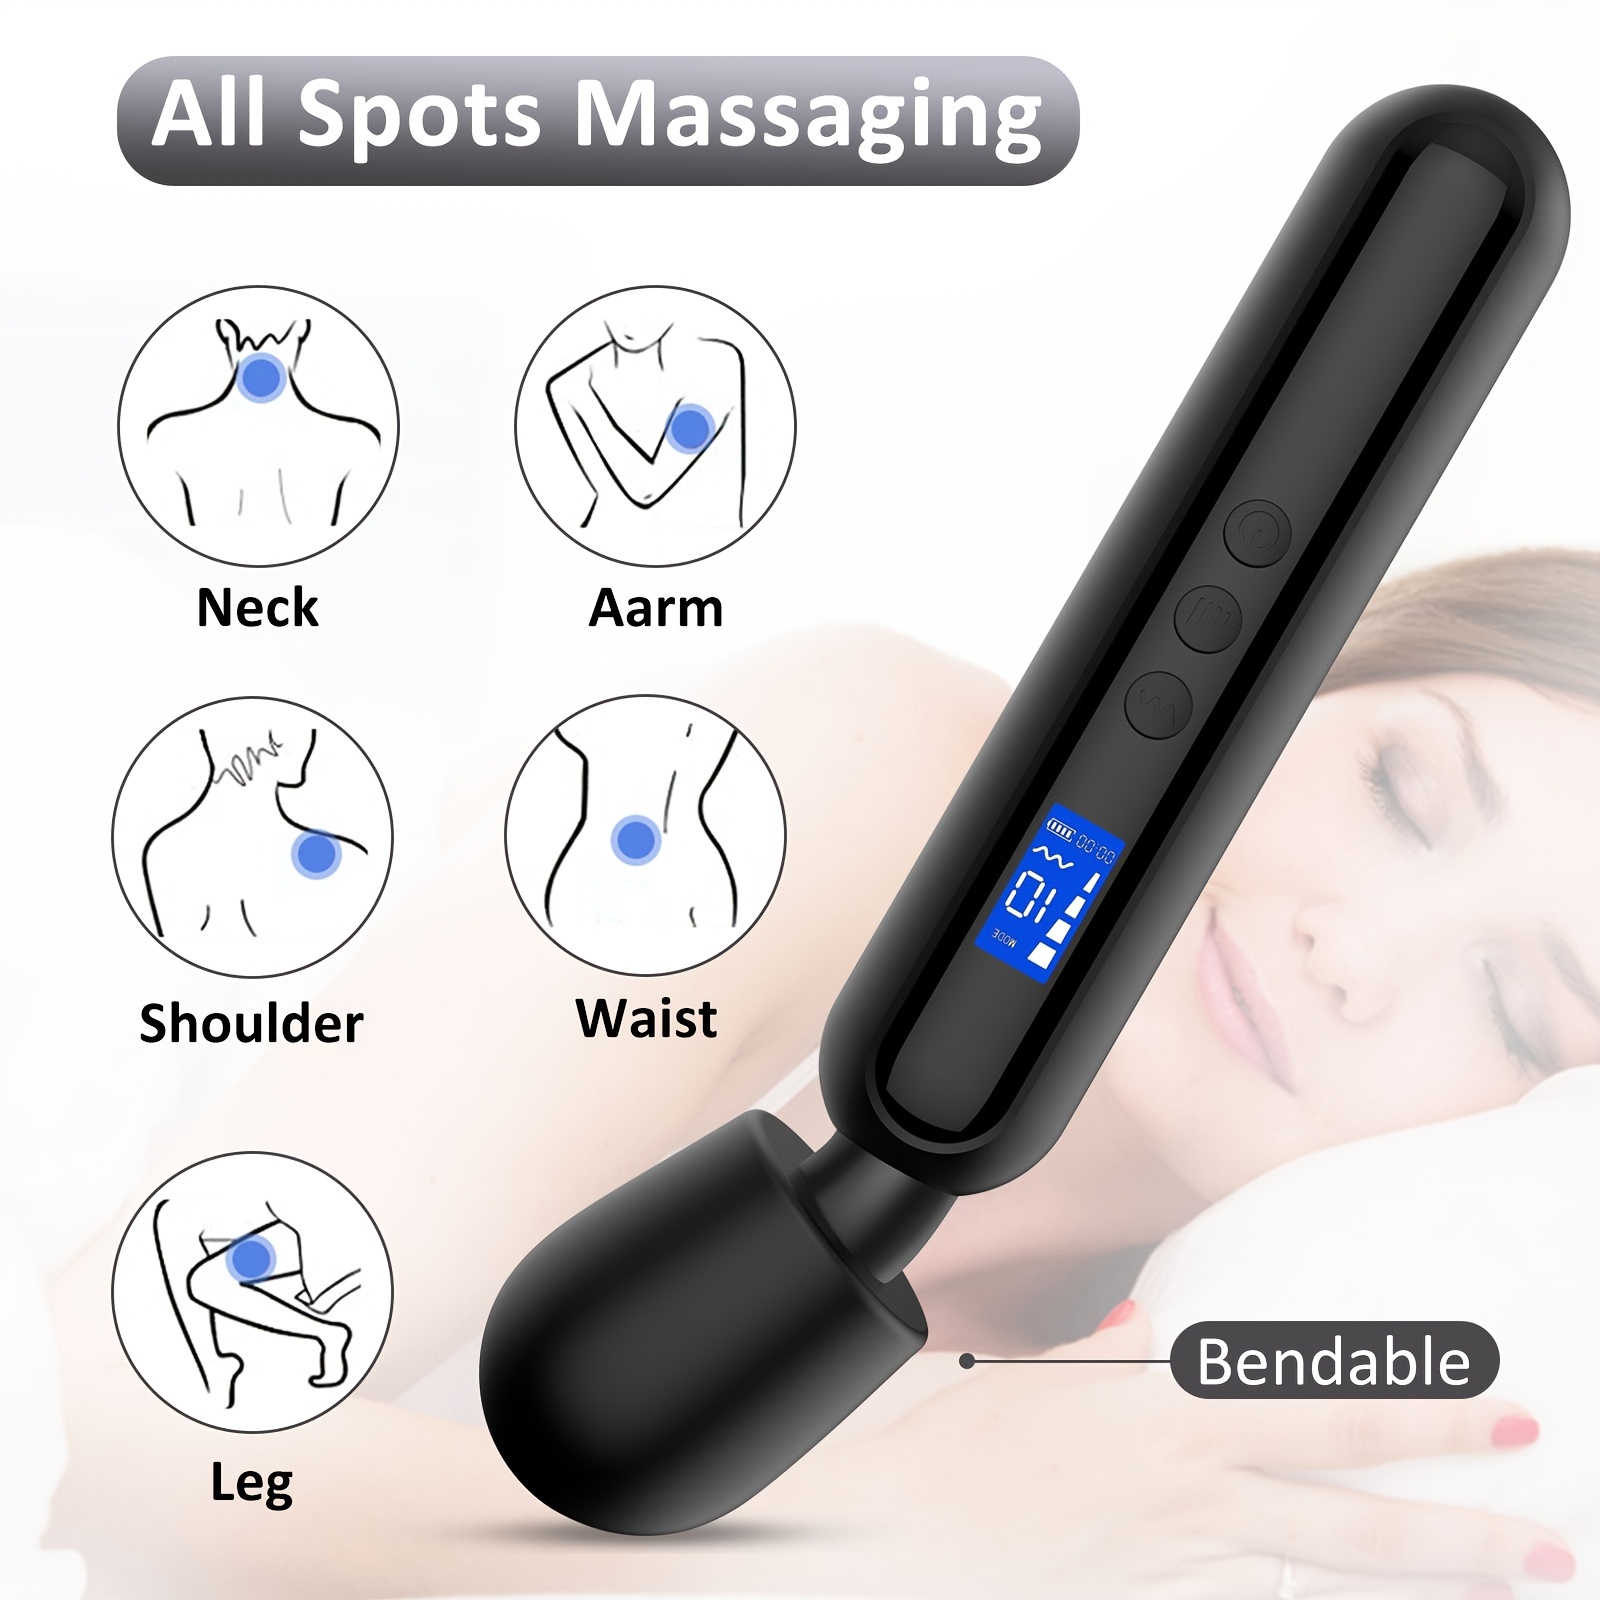 1pc Clitoris Stimulator Sex Toys For G Spot Magic Mini Vibrator Wand Personal Vibrating Massager With Lcd Display 10 Modes 4 Speeds Vibrator For Woman Female Pleasure - Health and Household pic photo